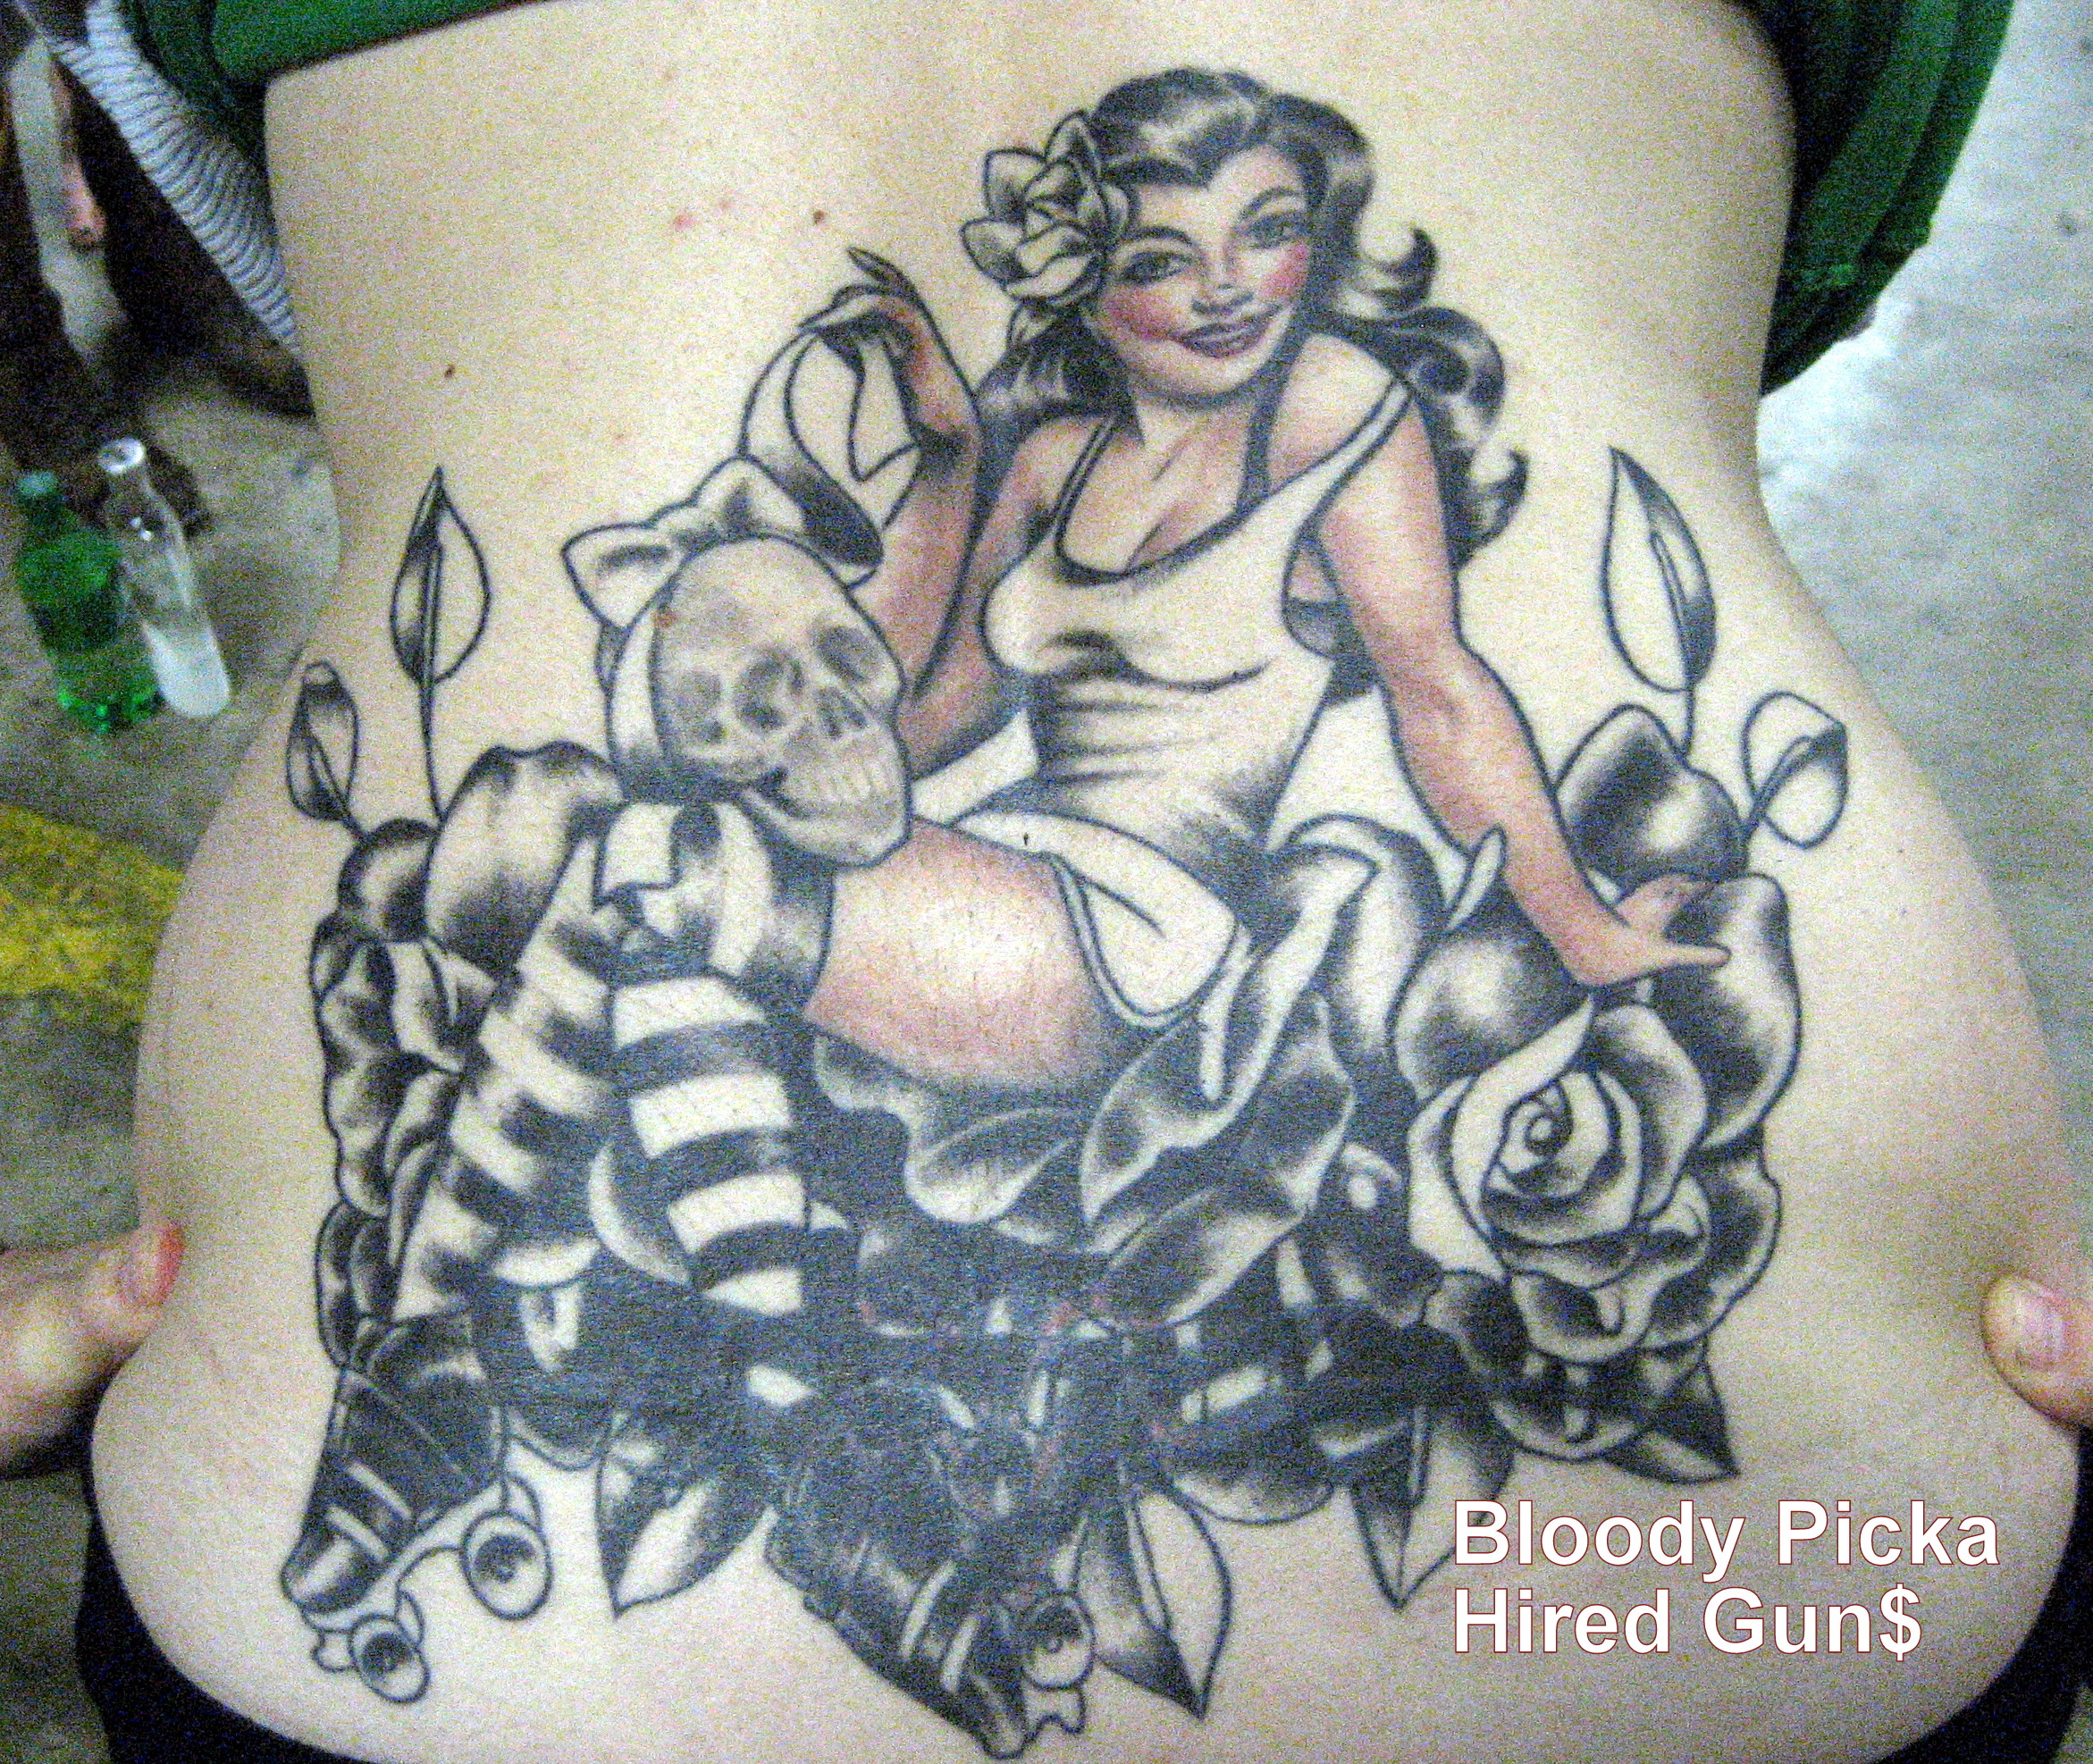 A roller derby fairie | Her love of fairies and roller derby… | Flickr